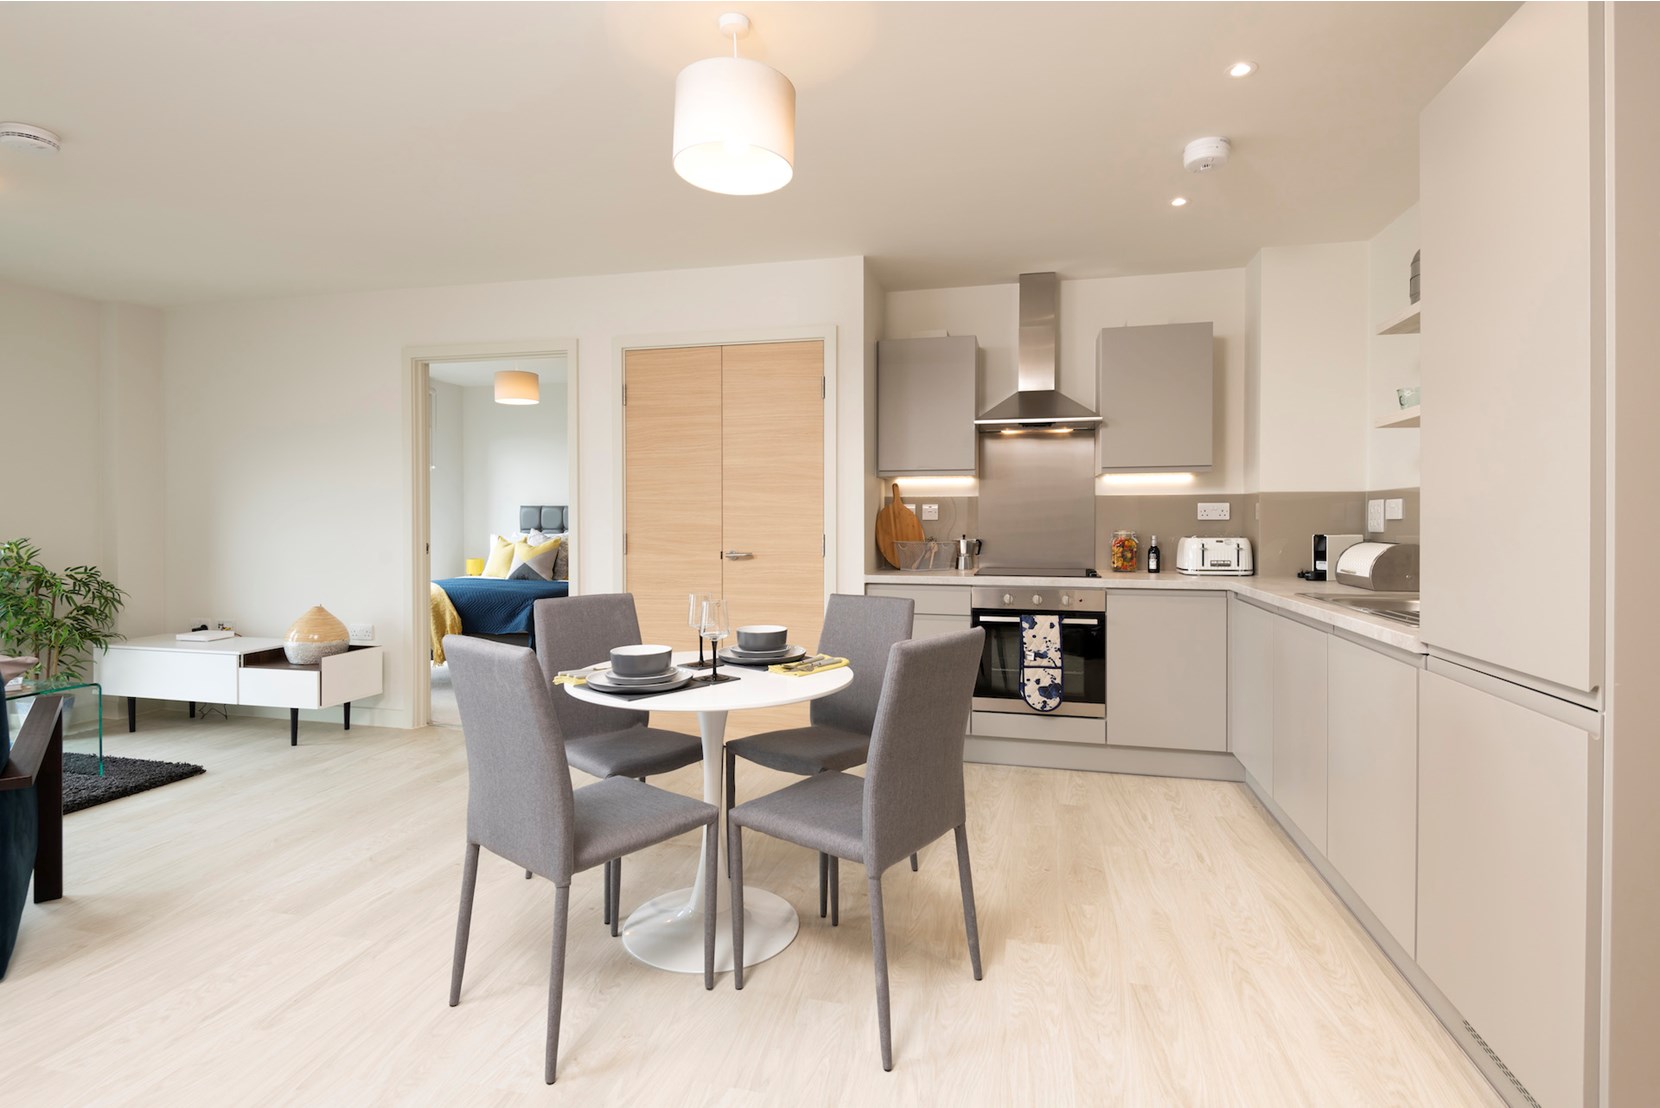 Apartments to Rent by Allsop at The Trilogy, Manchester, M15, kitchen dining